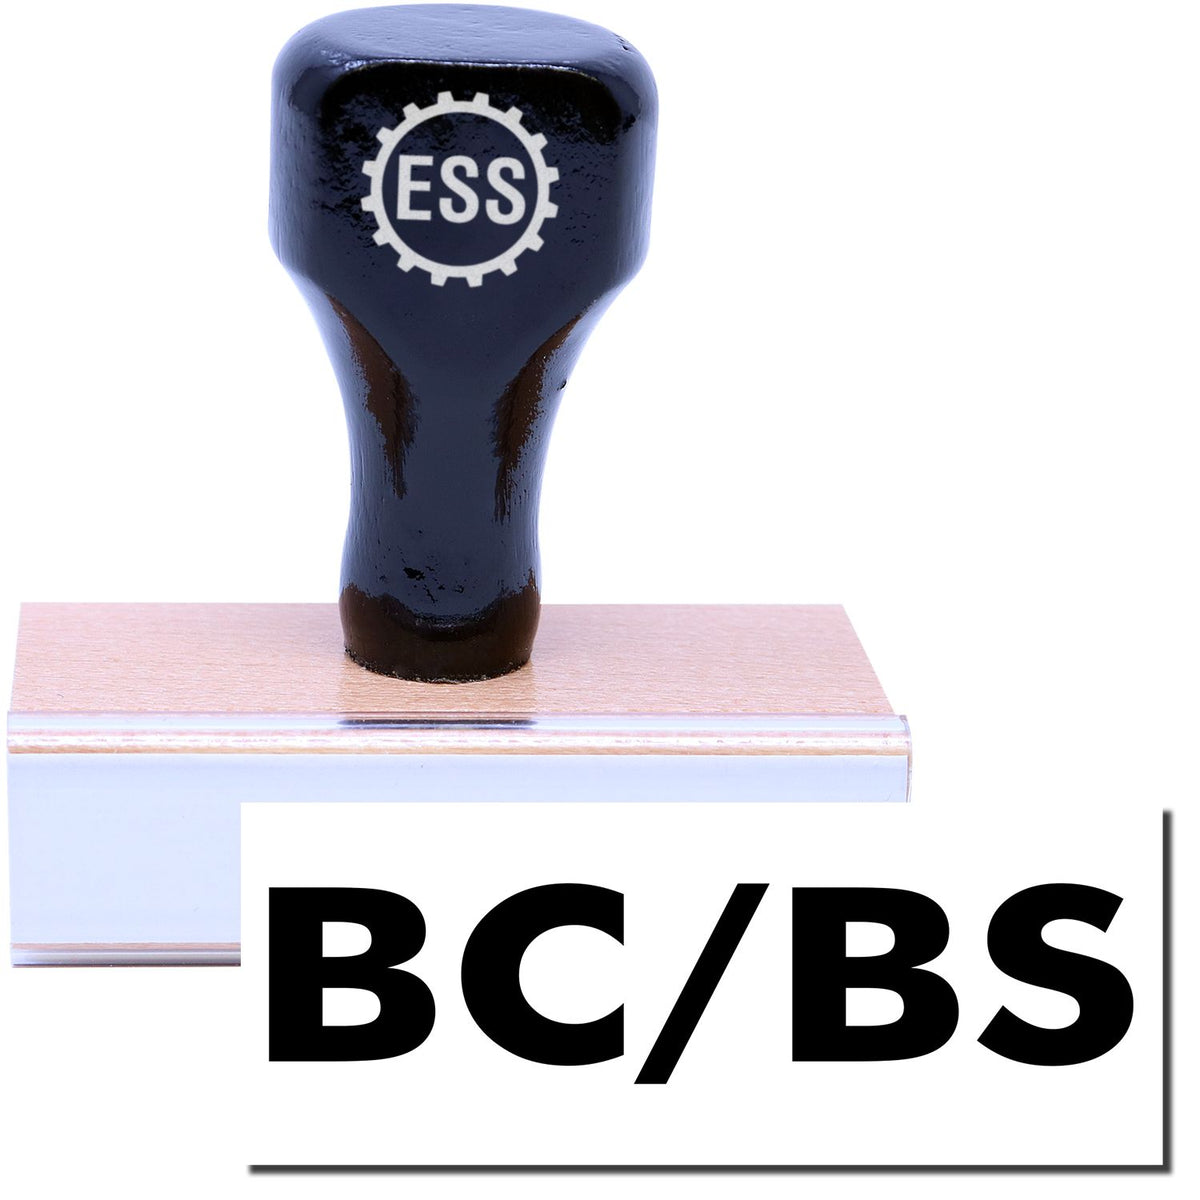 A stock office rubber stamp with a stamped image showing how the text &quot;BC/BS&quot; in a large font is displayed after stamping.